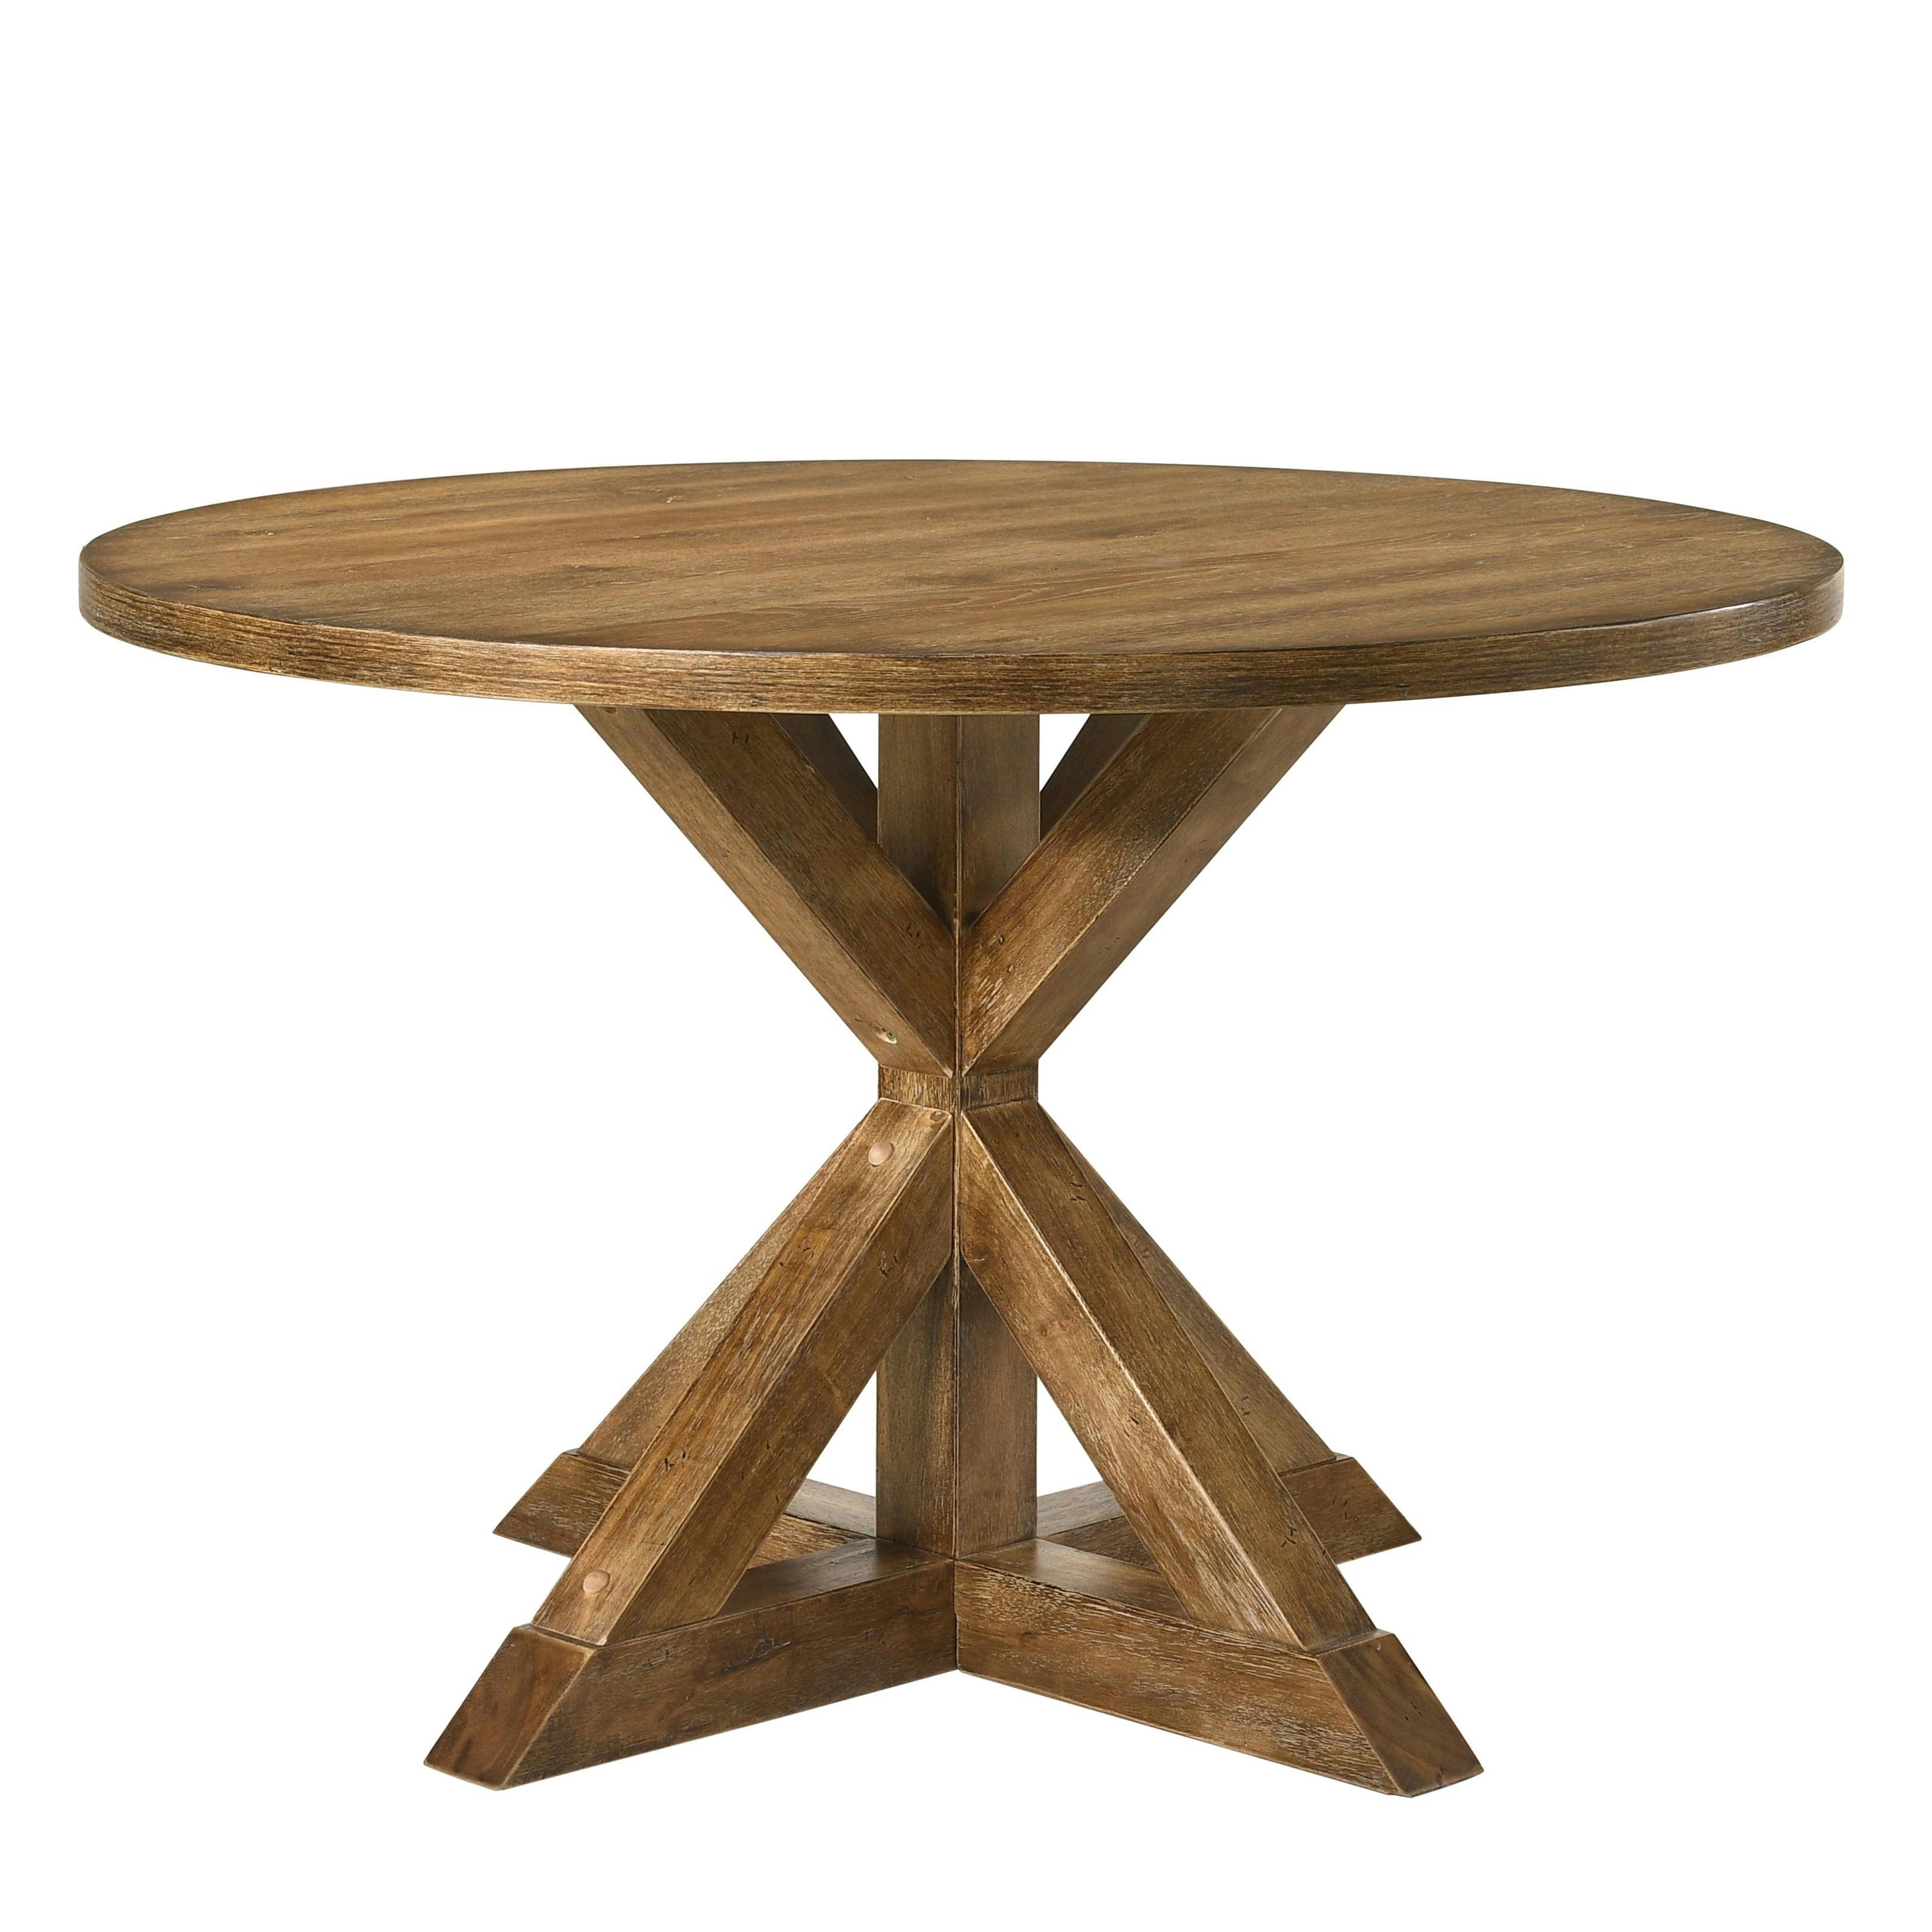 Transitional 48" Reclaimed Weathered Oak Round Dining Table